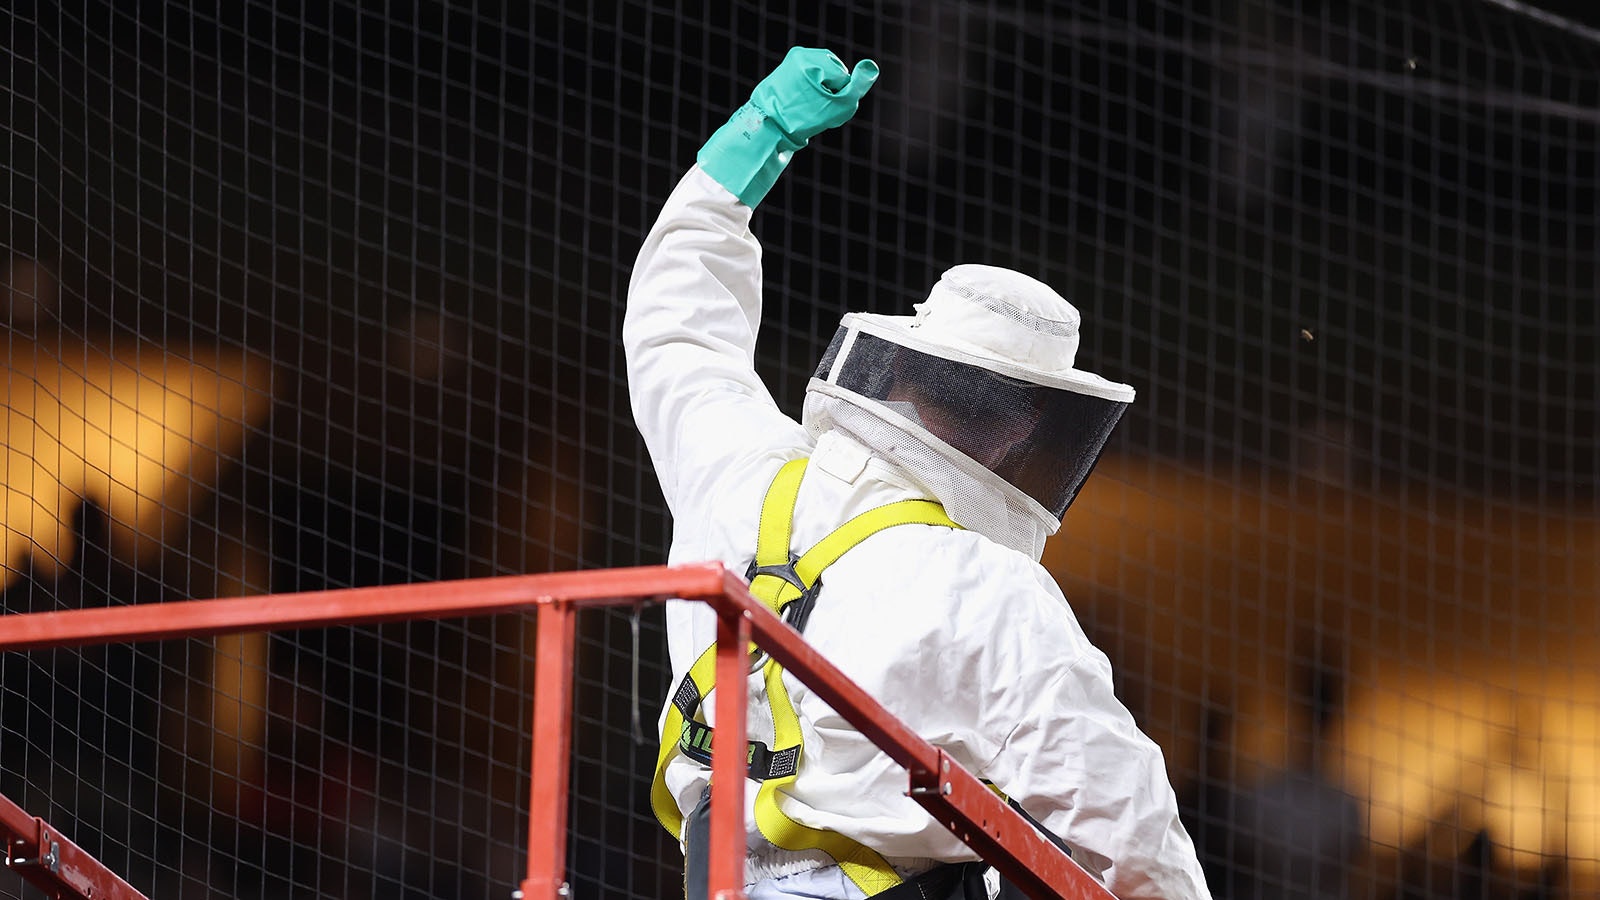 Beekeeper Matt Hilton reacts to fans after removing a colony of bees that formed on the net behind home plate during a delay to the MLB game between the Los Angeles Dodgers and the Arizona Diamondbacks at Chase Field on April 30, 2024, in Phoenix, Arizona.